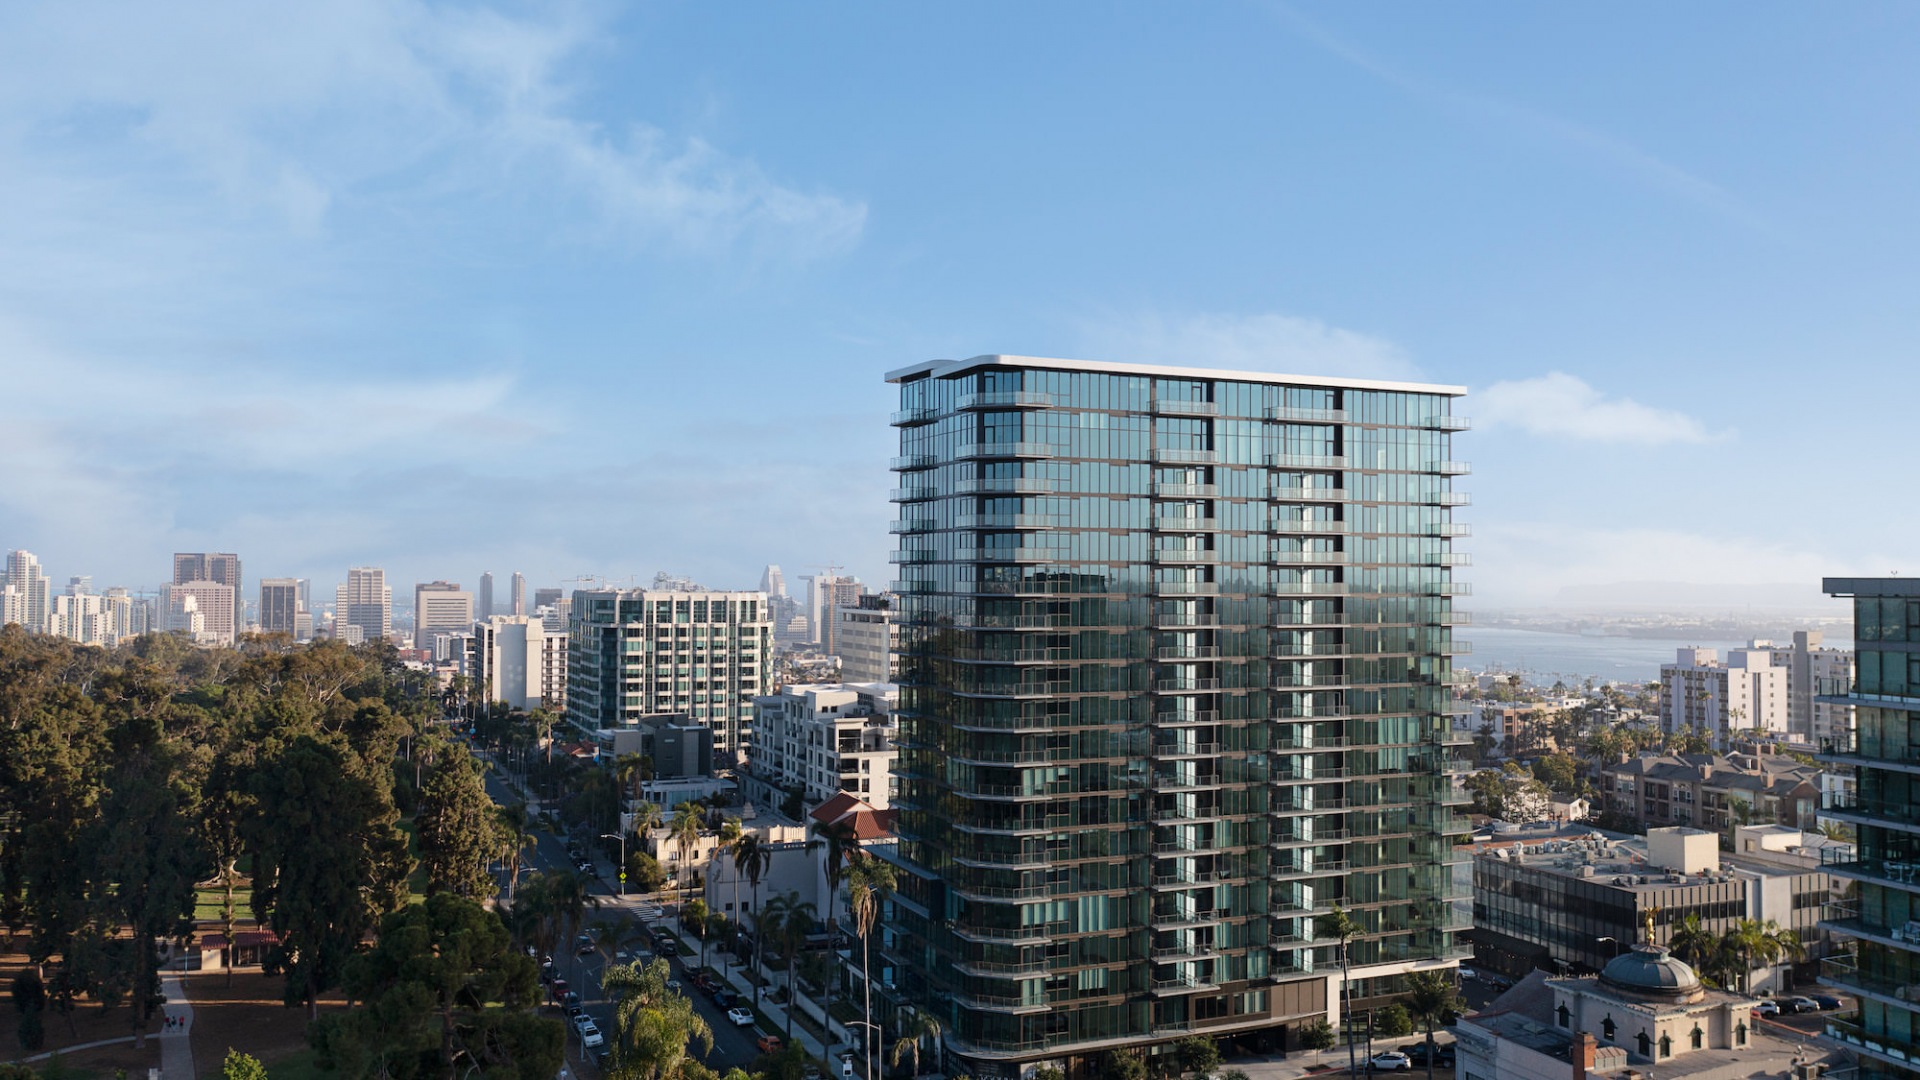 Exterior view of 525 Olive with downtown San Diego and water in the background